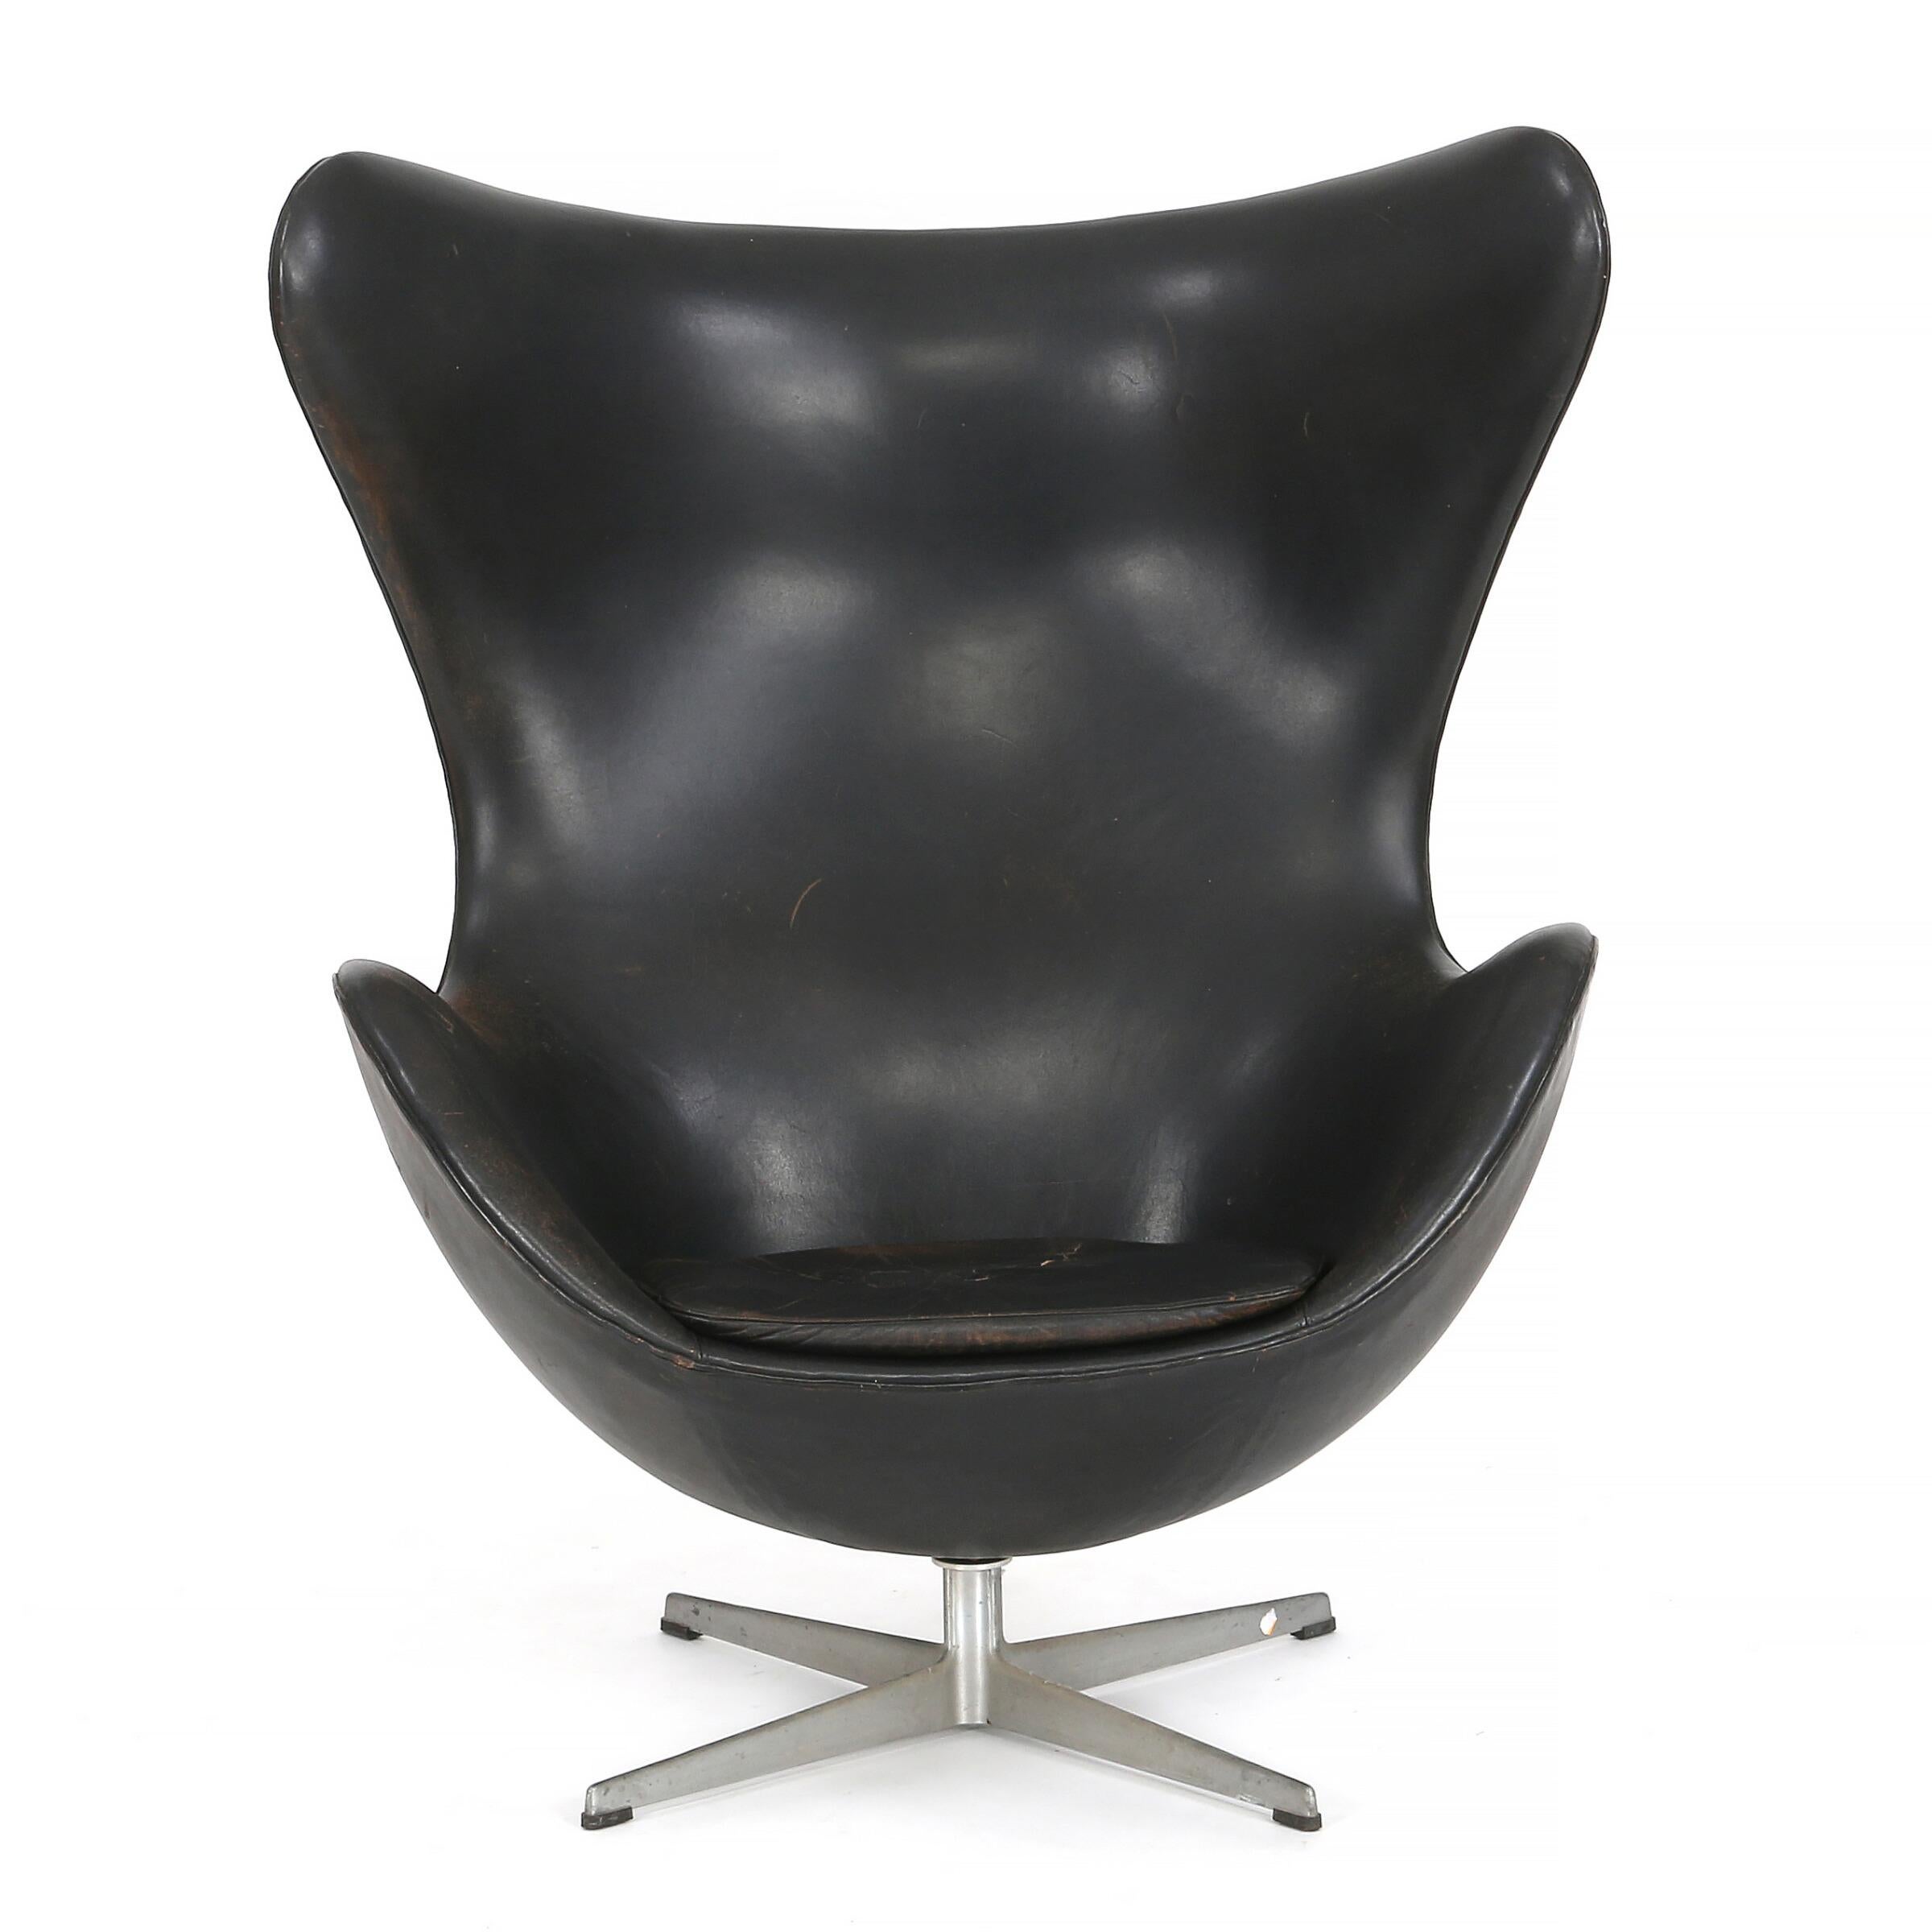 A beautiful example of Jacobsen's iconic modern wingback chair “The Egg chair” originally designed for the SAS Radisson hotel in Copenhagen. This early chair represents Jacobsen's true vision for the design. Other than the blue he specified for the